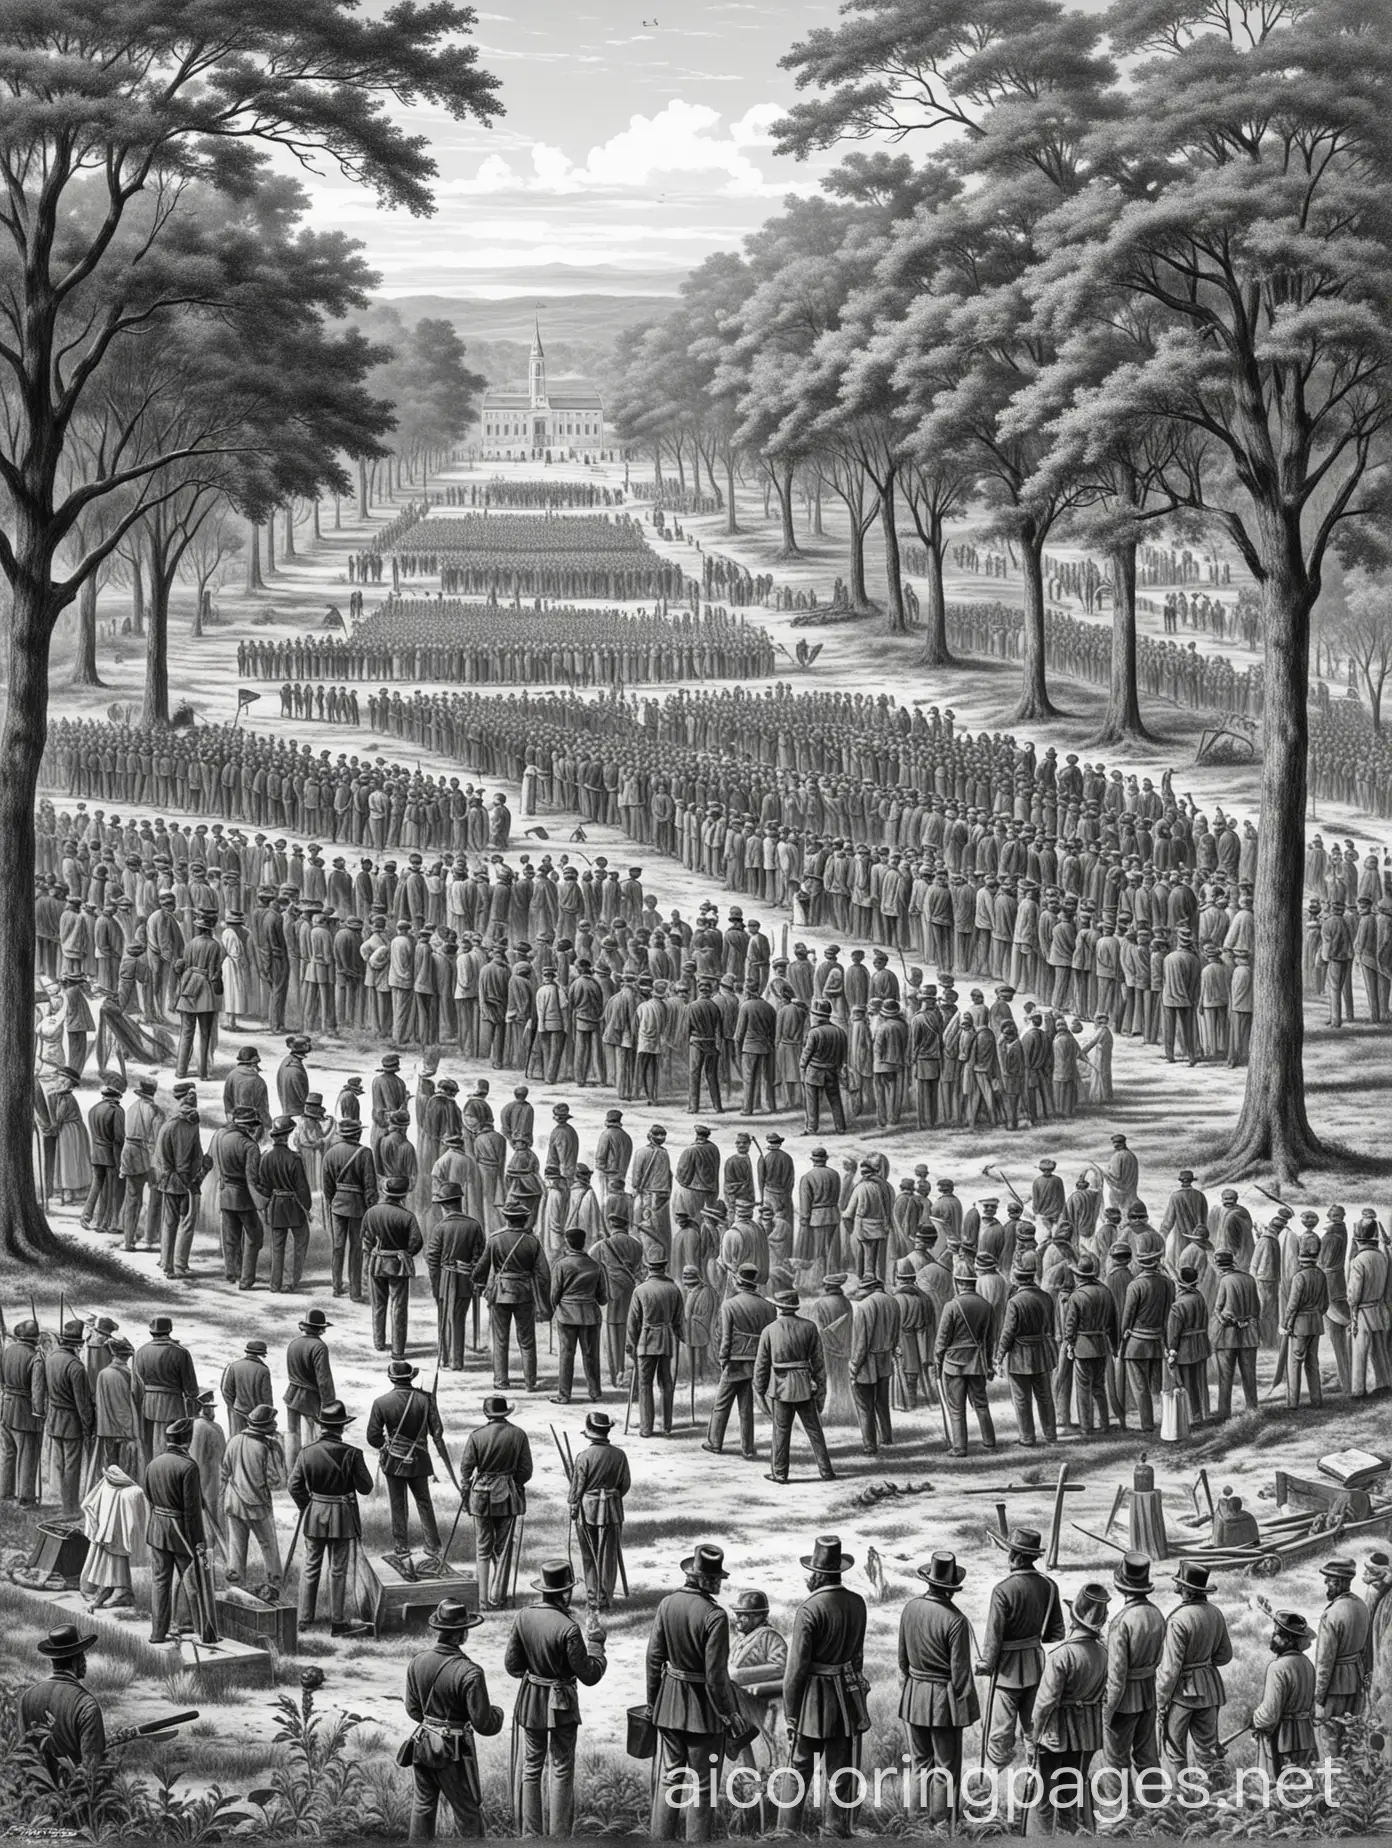 A scene depicting the May 1, 1865 gathering in Charleston, South Carolina, where recently freed enslaved people and Union Army members gathered to bury and decorate the graves of fallen Union soldiers at a former Confederate prison camp., Coloring Page, black and white, line art, white background, Simplicity, Ample White Space. The background of the coloring page is plain white to make it easy for young children to color within the lines. The outlines of all the subjects are easy to distinguish, making it simple for kids to color without too much difficulty